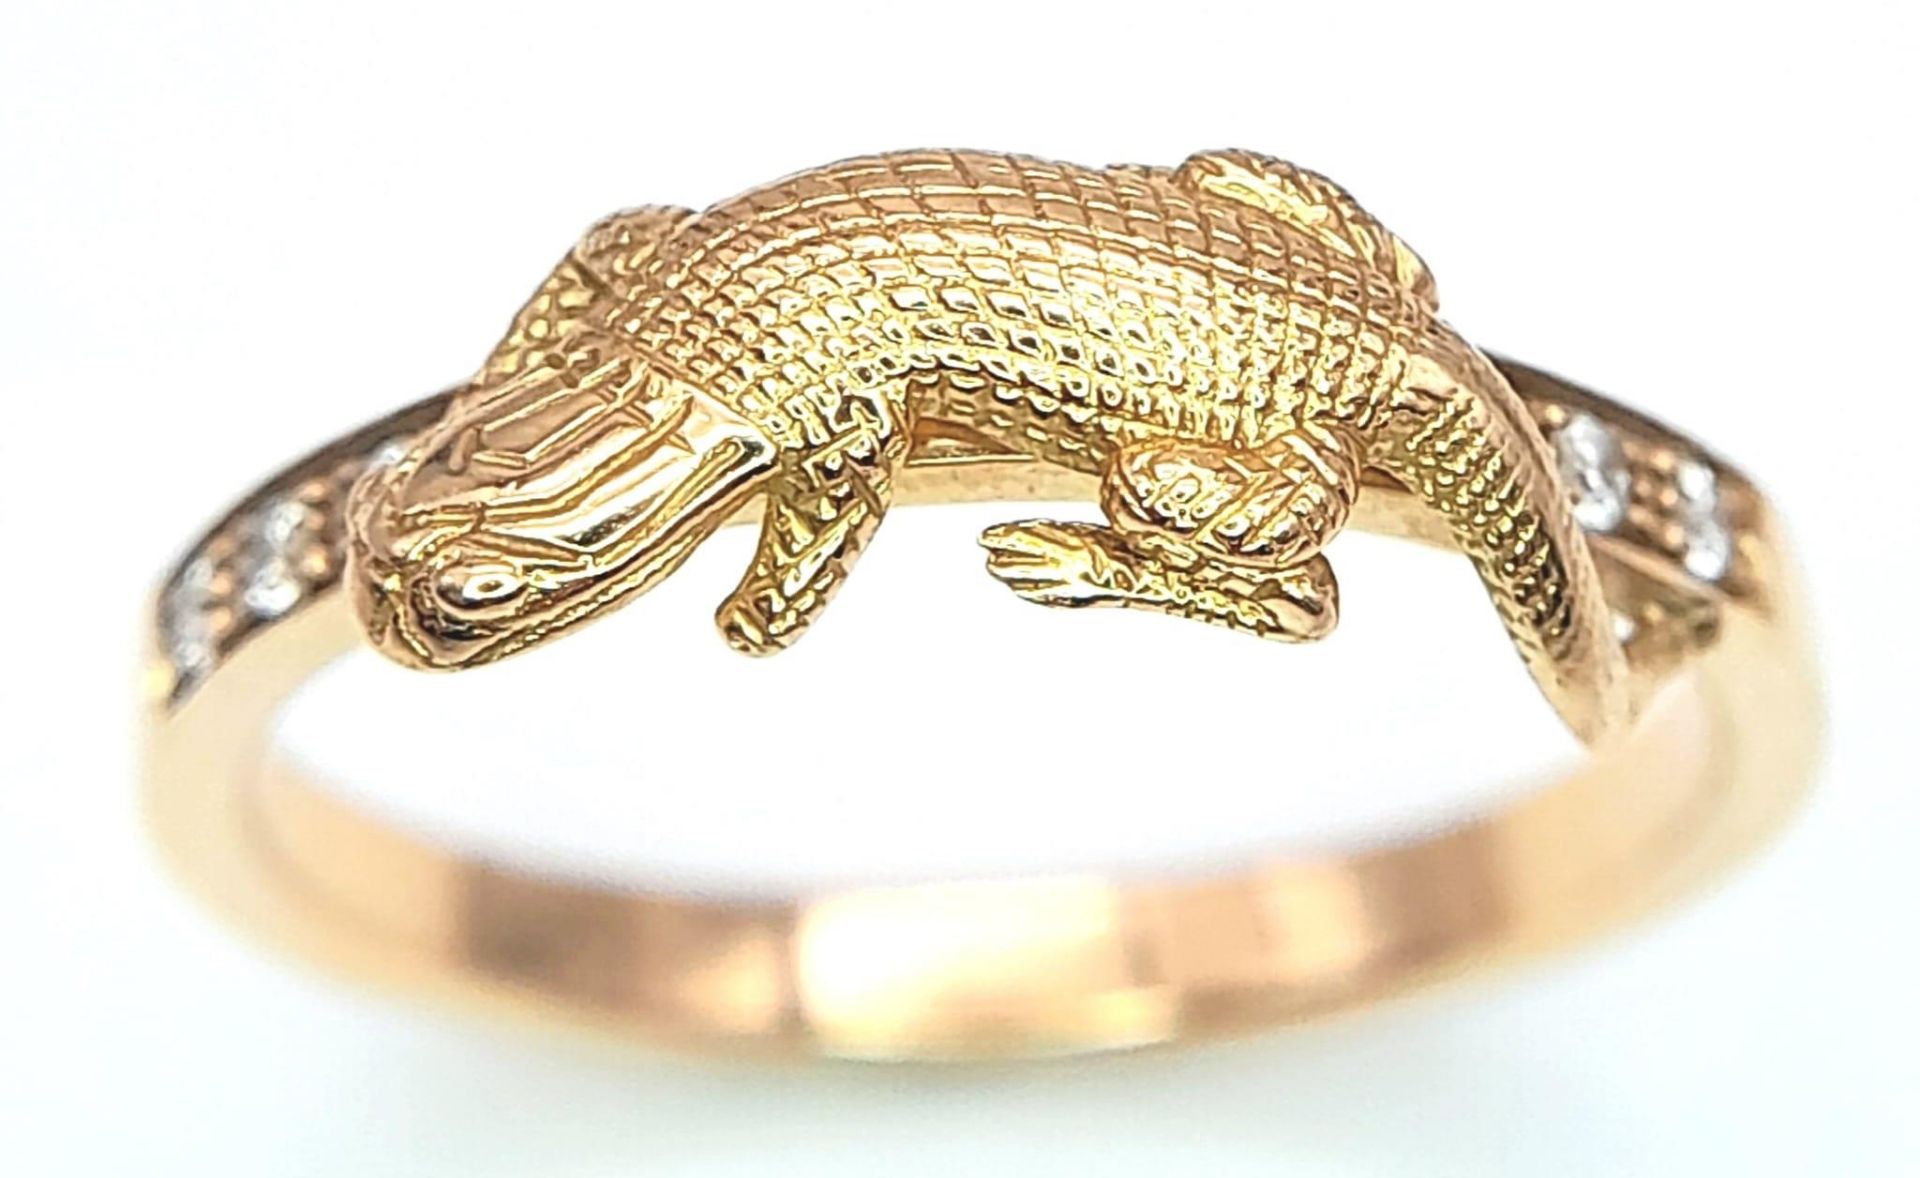 AN 18K YELLOW GOLD, THEO FENNELL (DESIGNER) DIAMOND SET LIZARD RING. 3G. SIZE M - Image 3 of 6